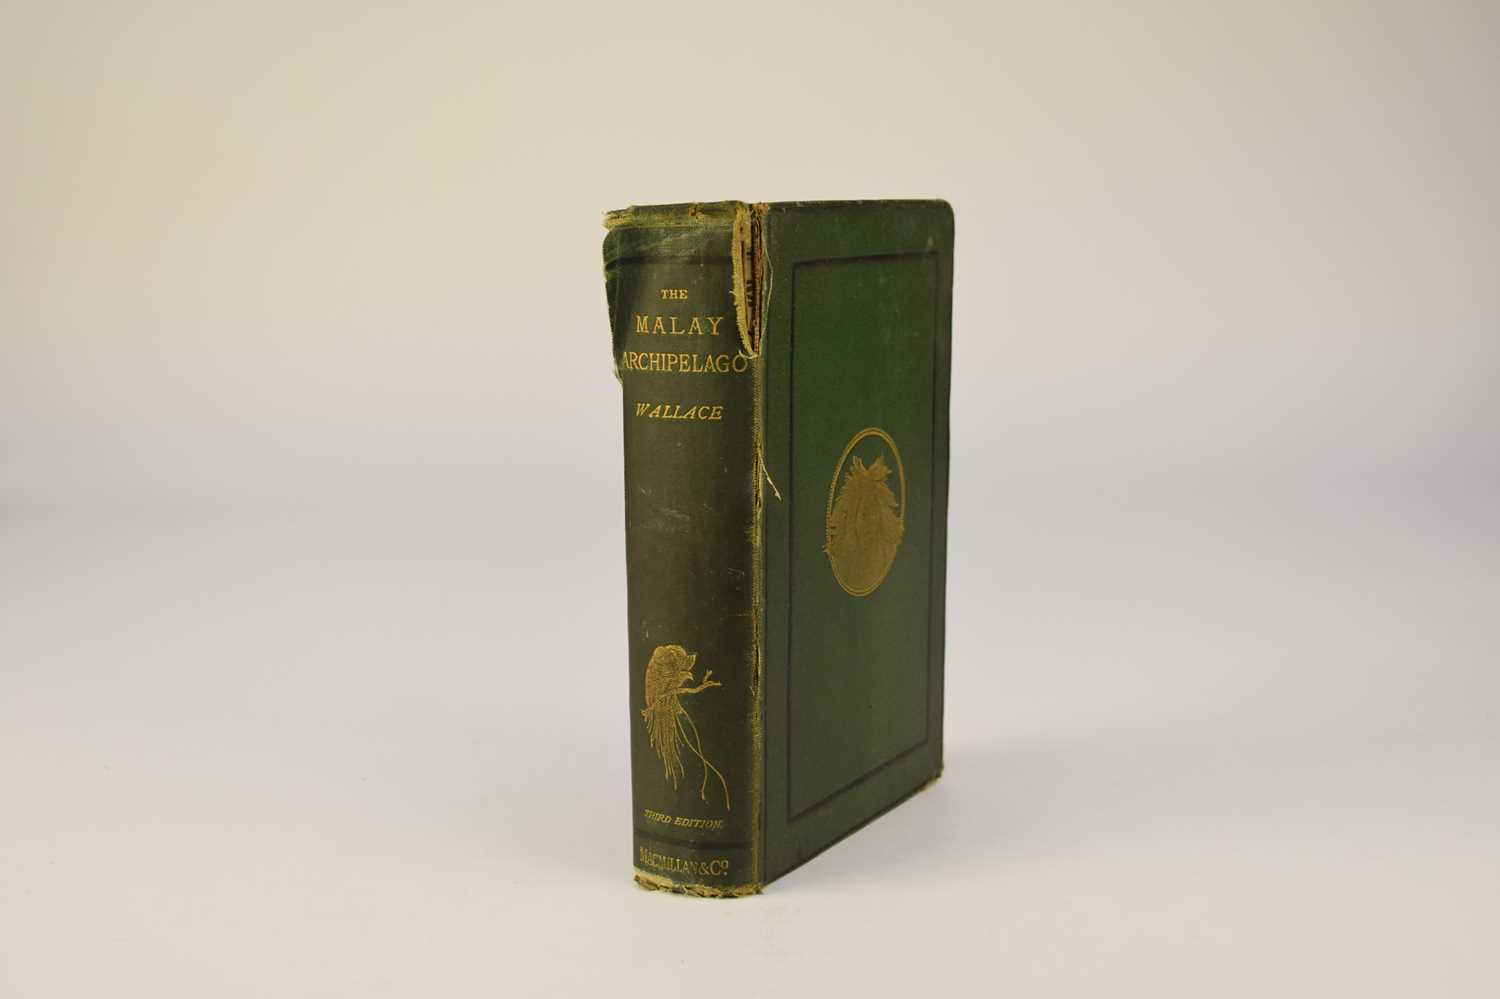 Lot 1008 - WALLACE, Alfred Russel, The Malay Archipelago, 3rd edition 1872.